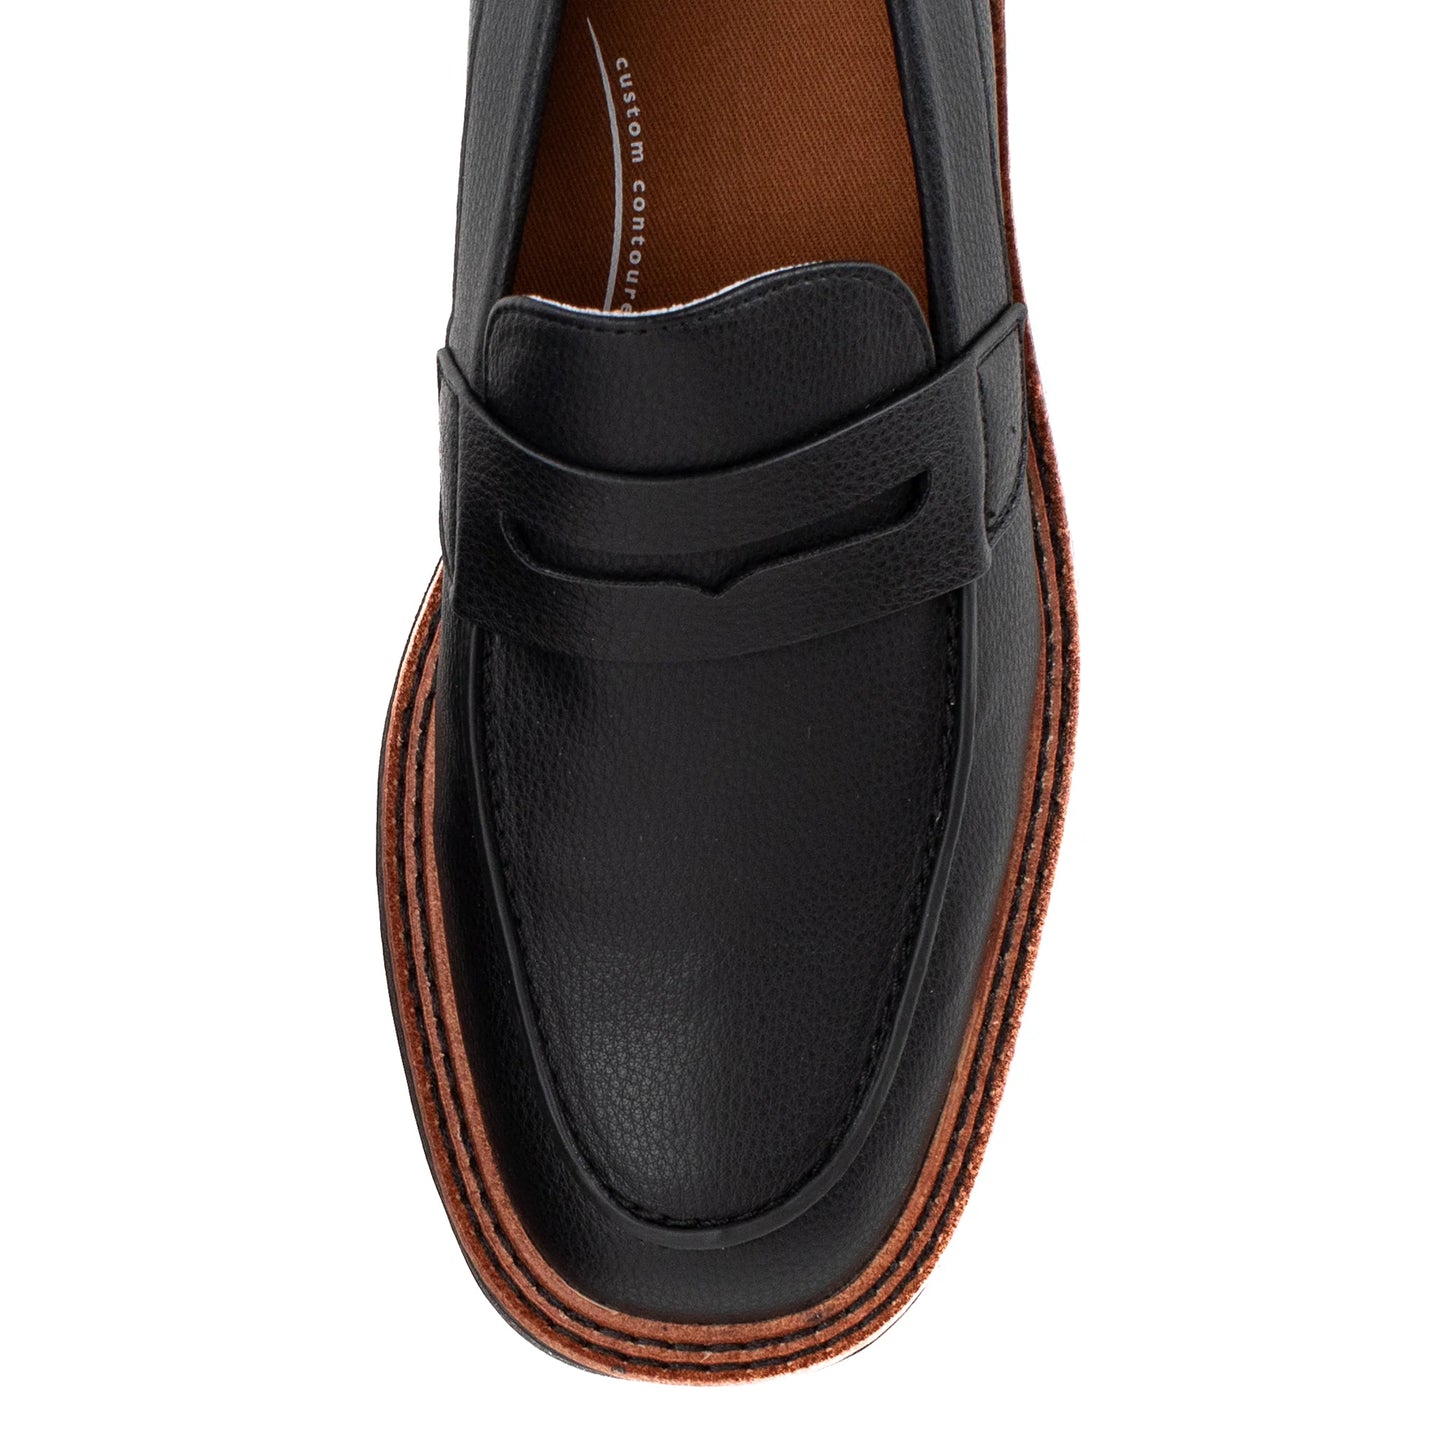 Sherry Loafer